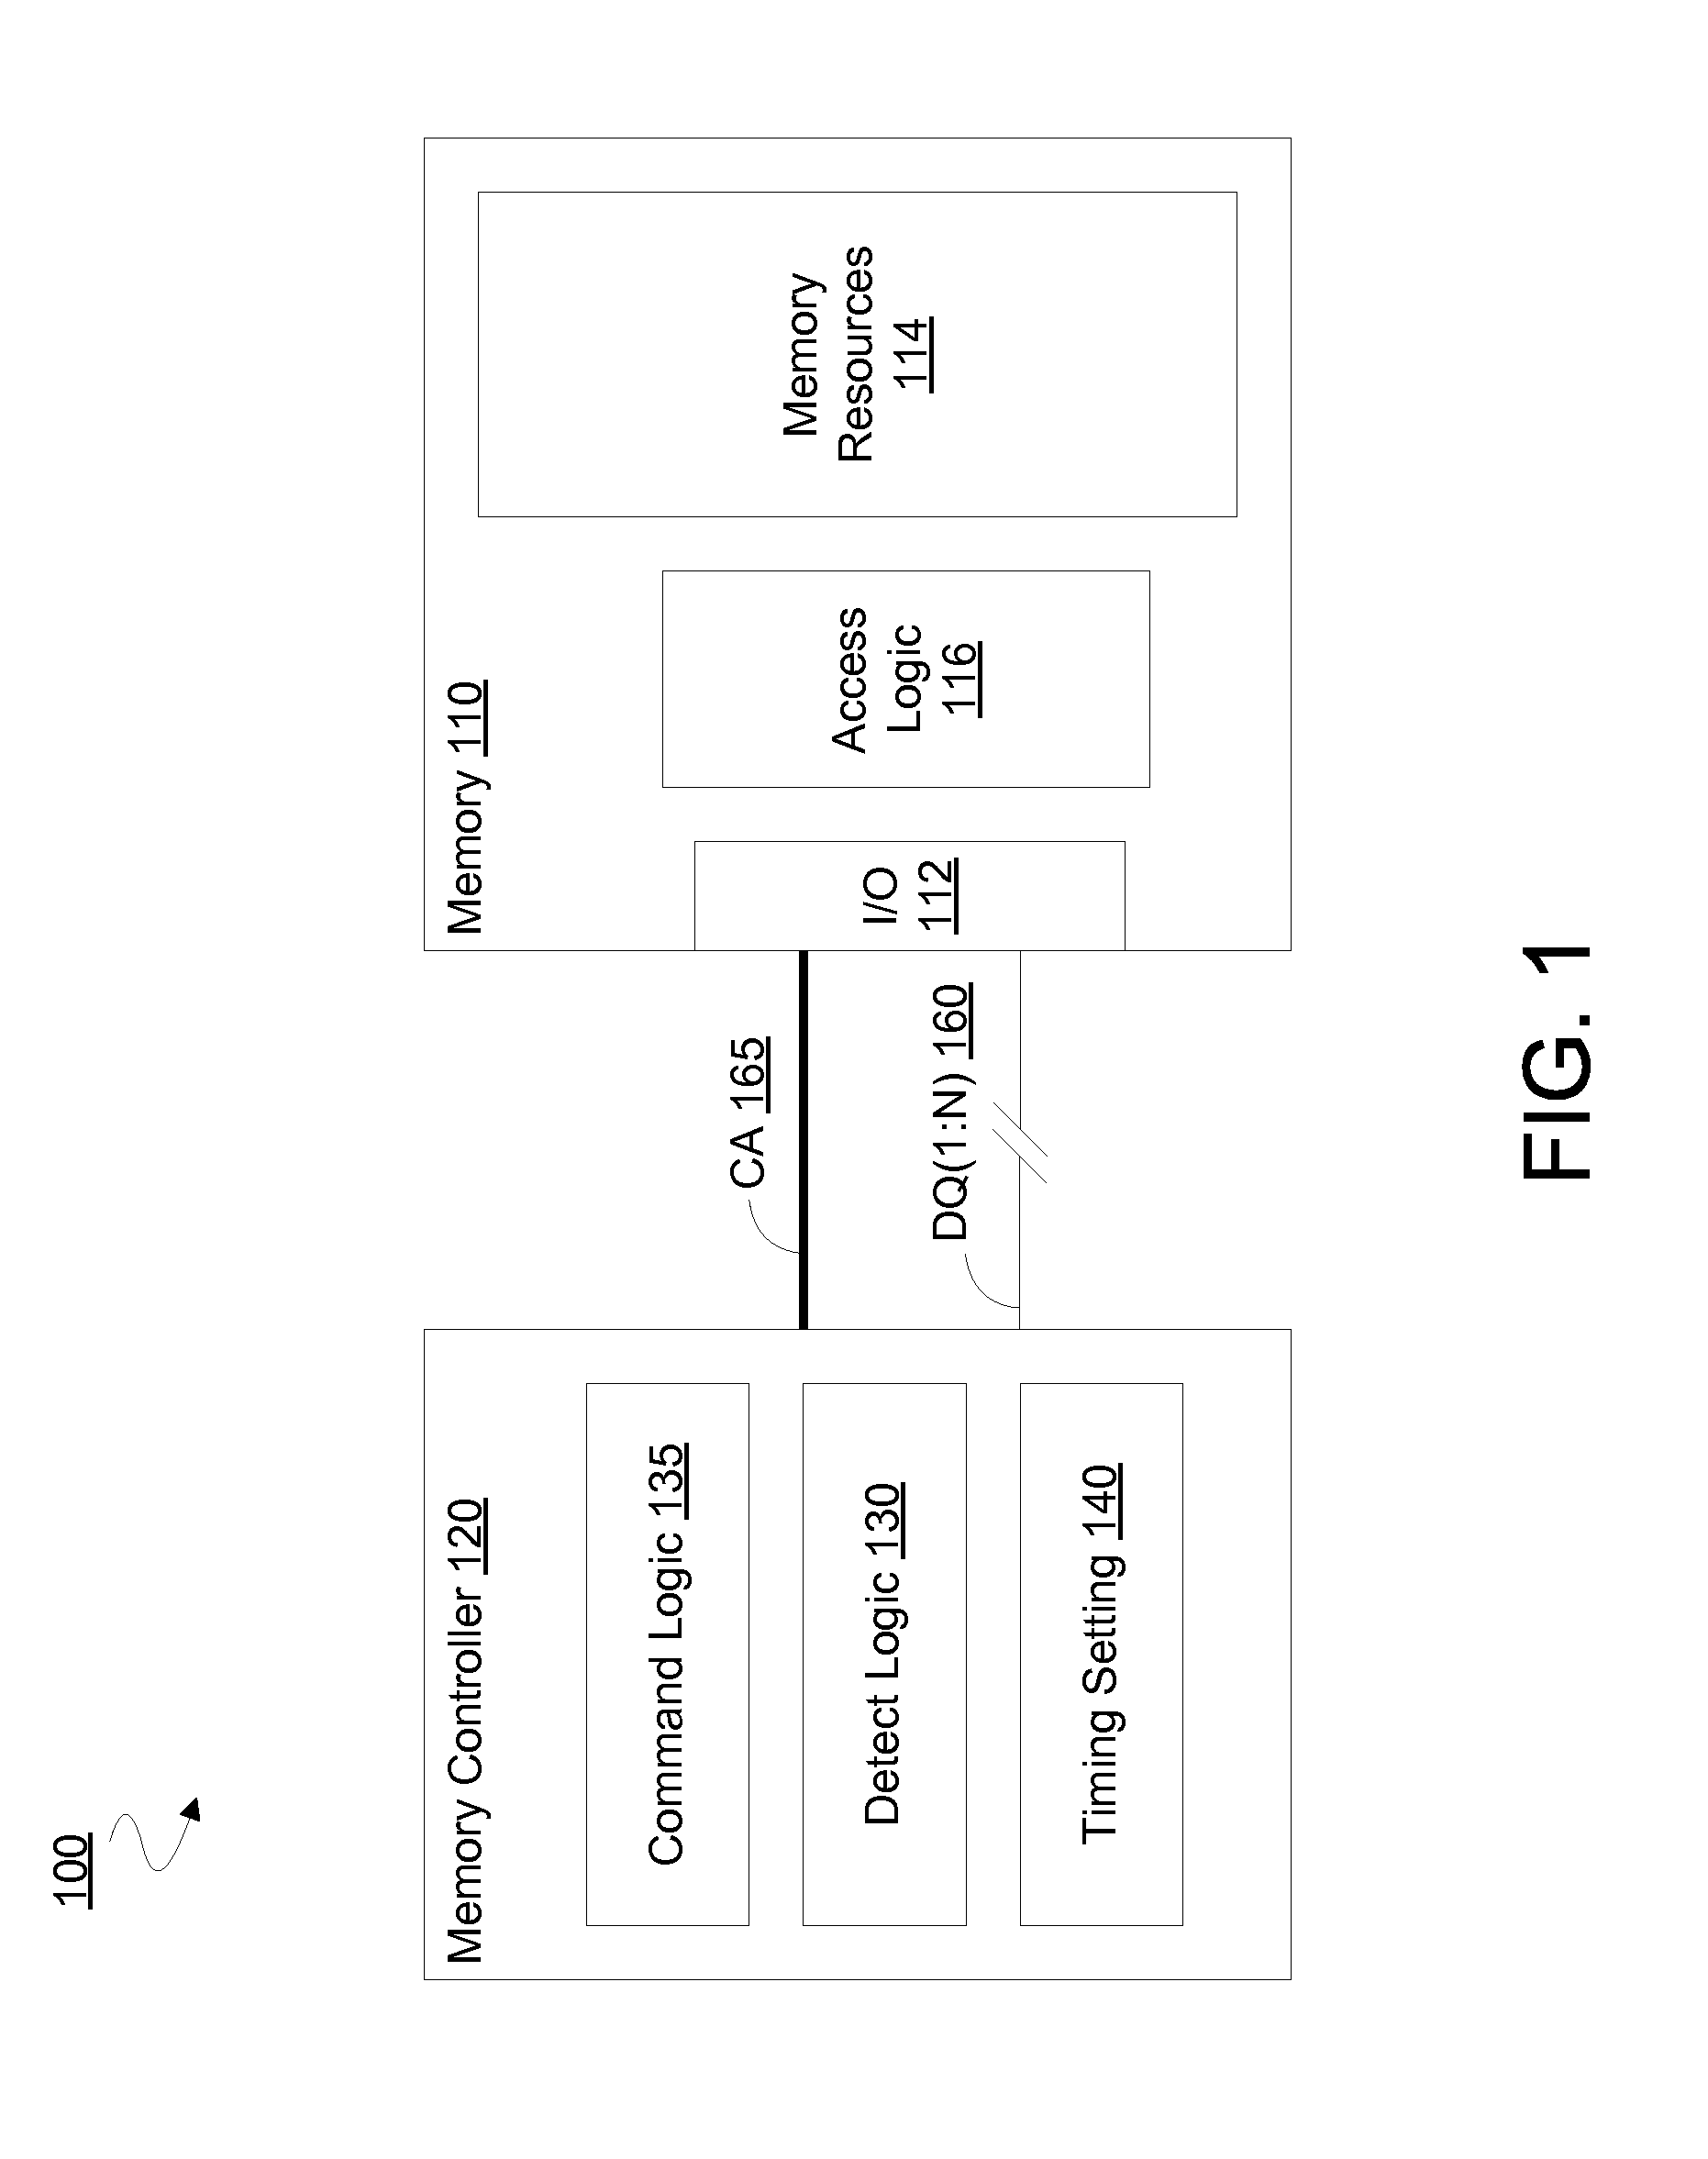 Apparatus, method and system to determine memory access command timing based on error detection